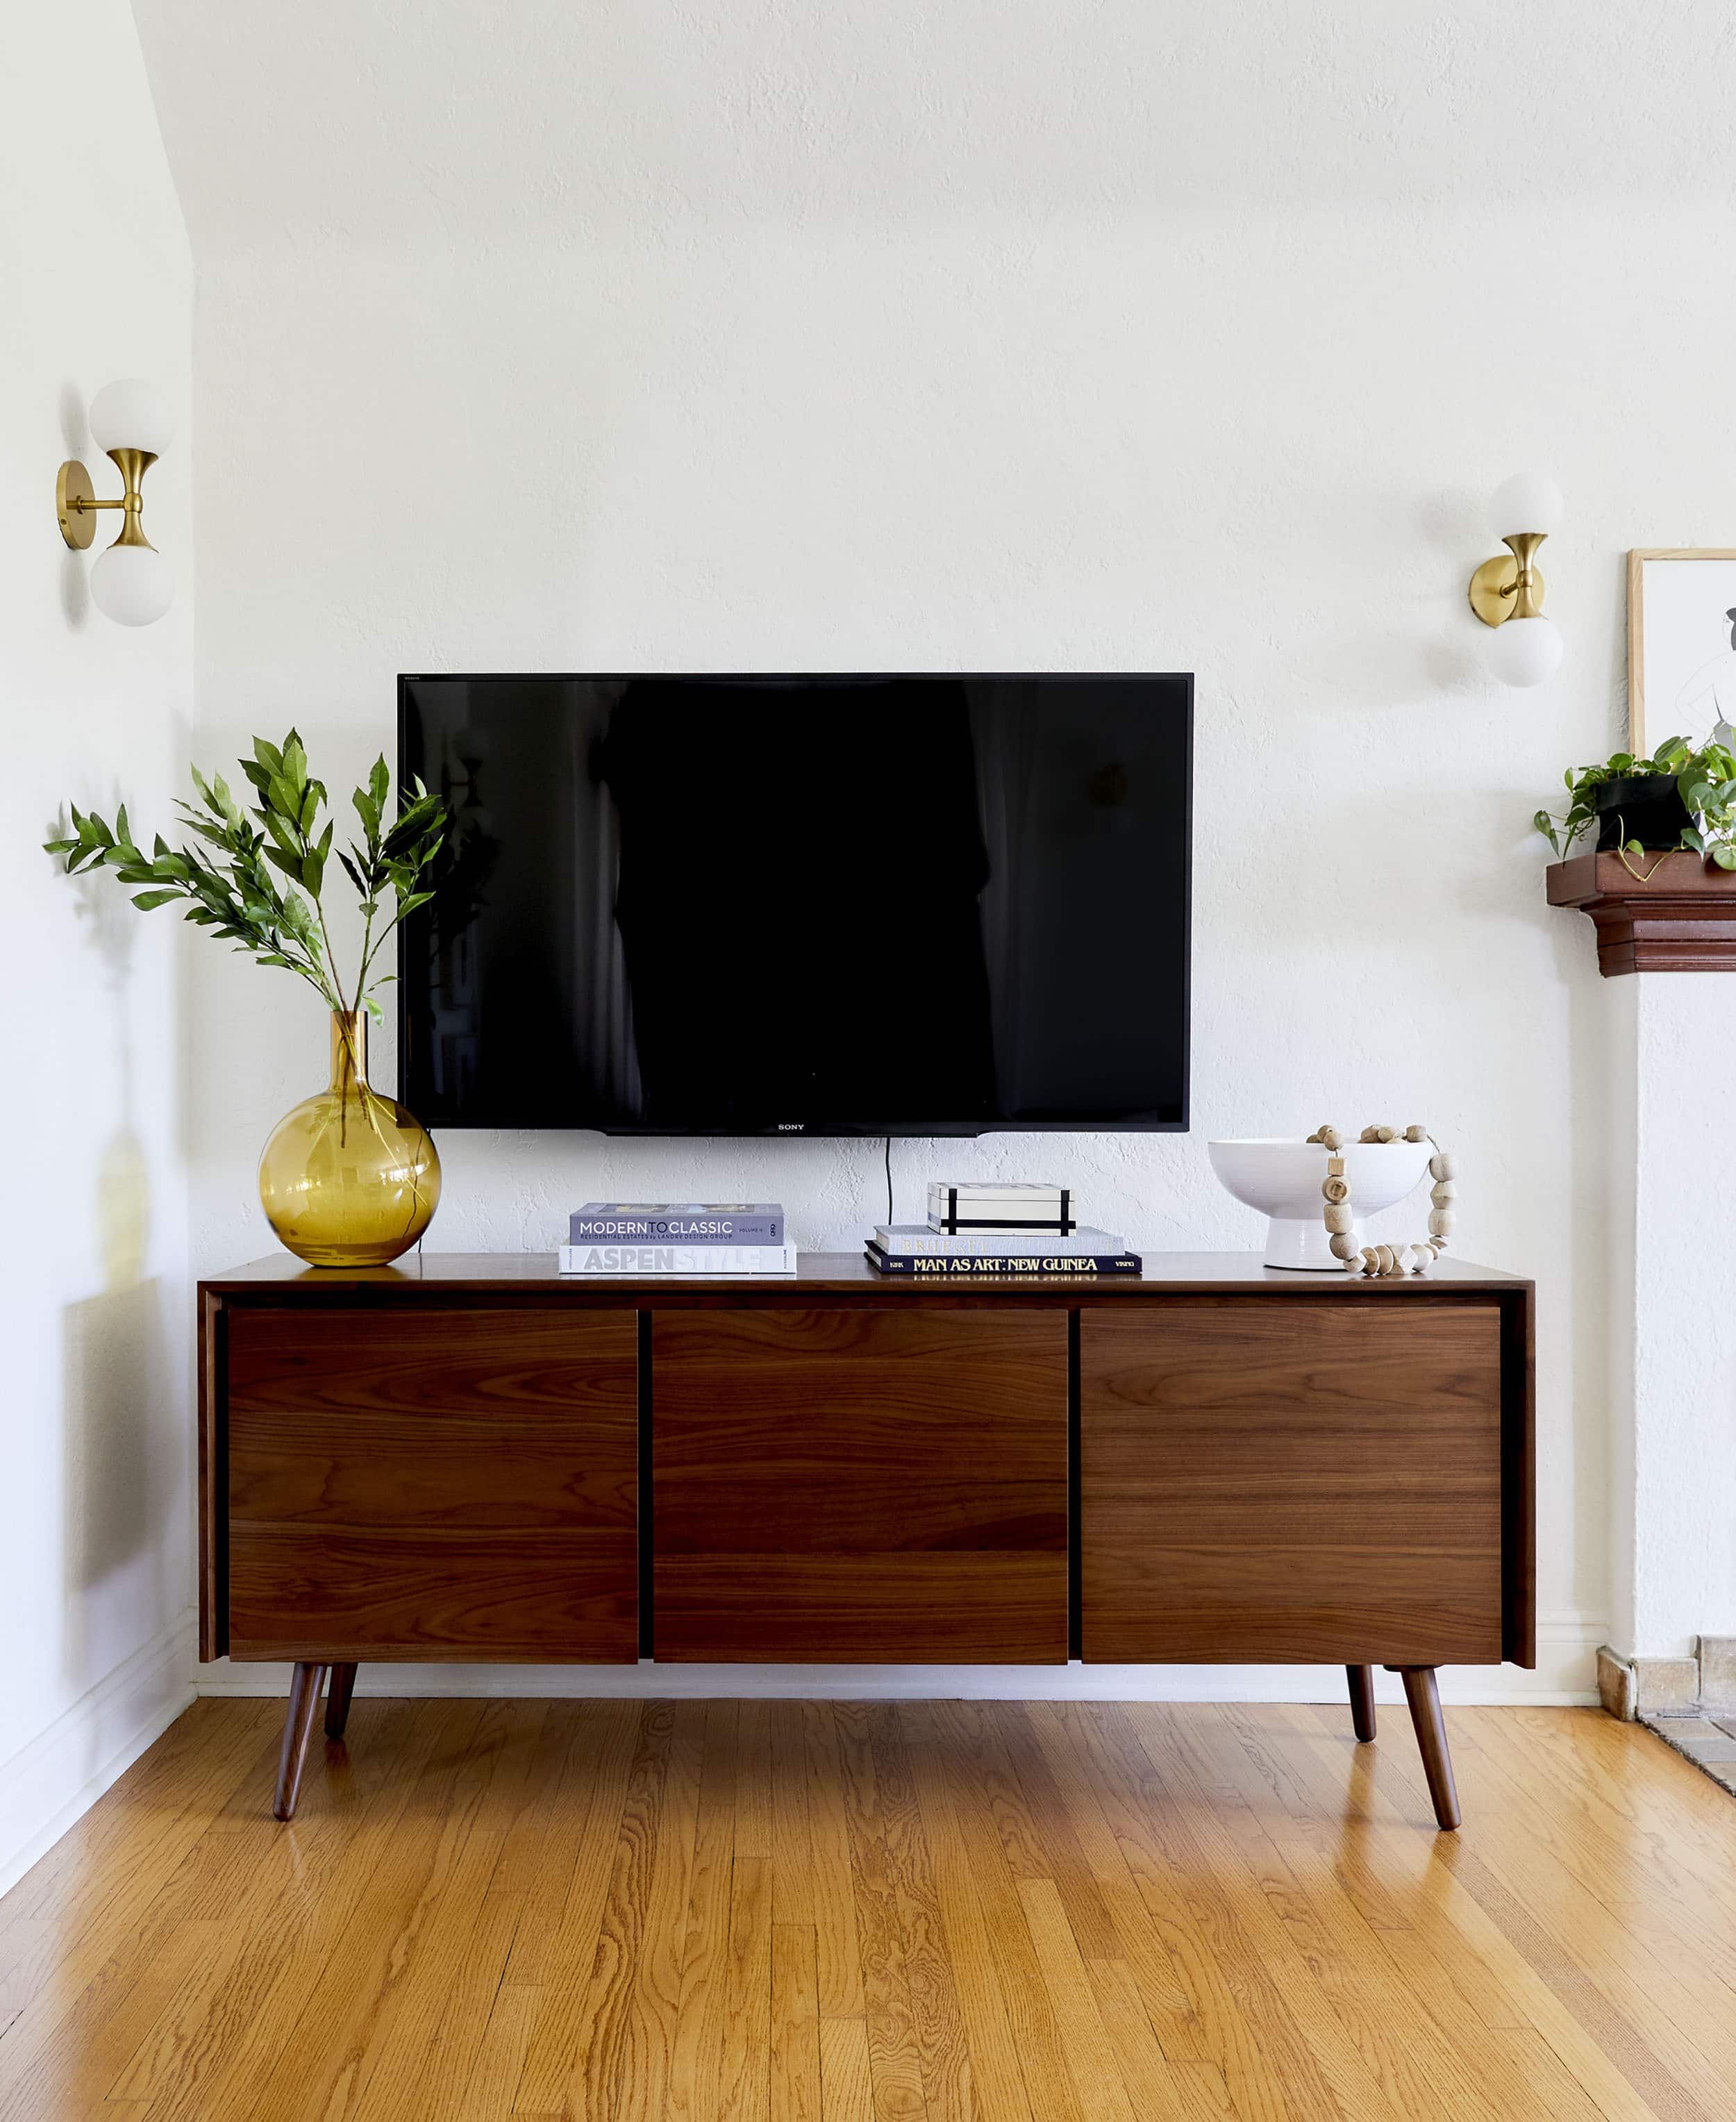 4 Ways To Style That Credenza For "real Life" + Shop Our Favorite Credenzas  – Emily Henderson Intended For 2017 Credenzas For Living Room (View 6 of 15)